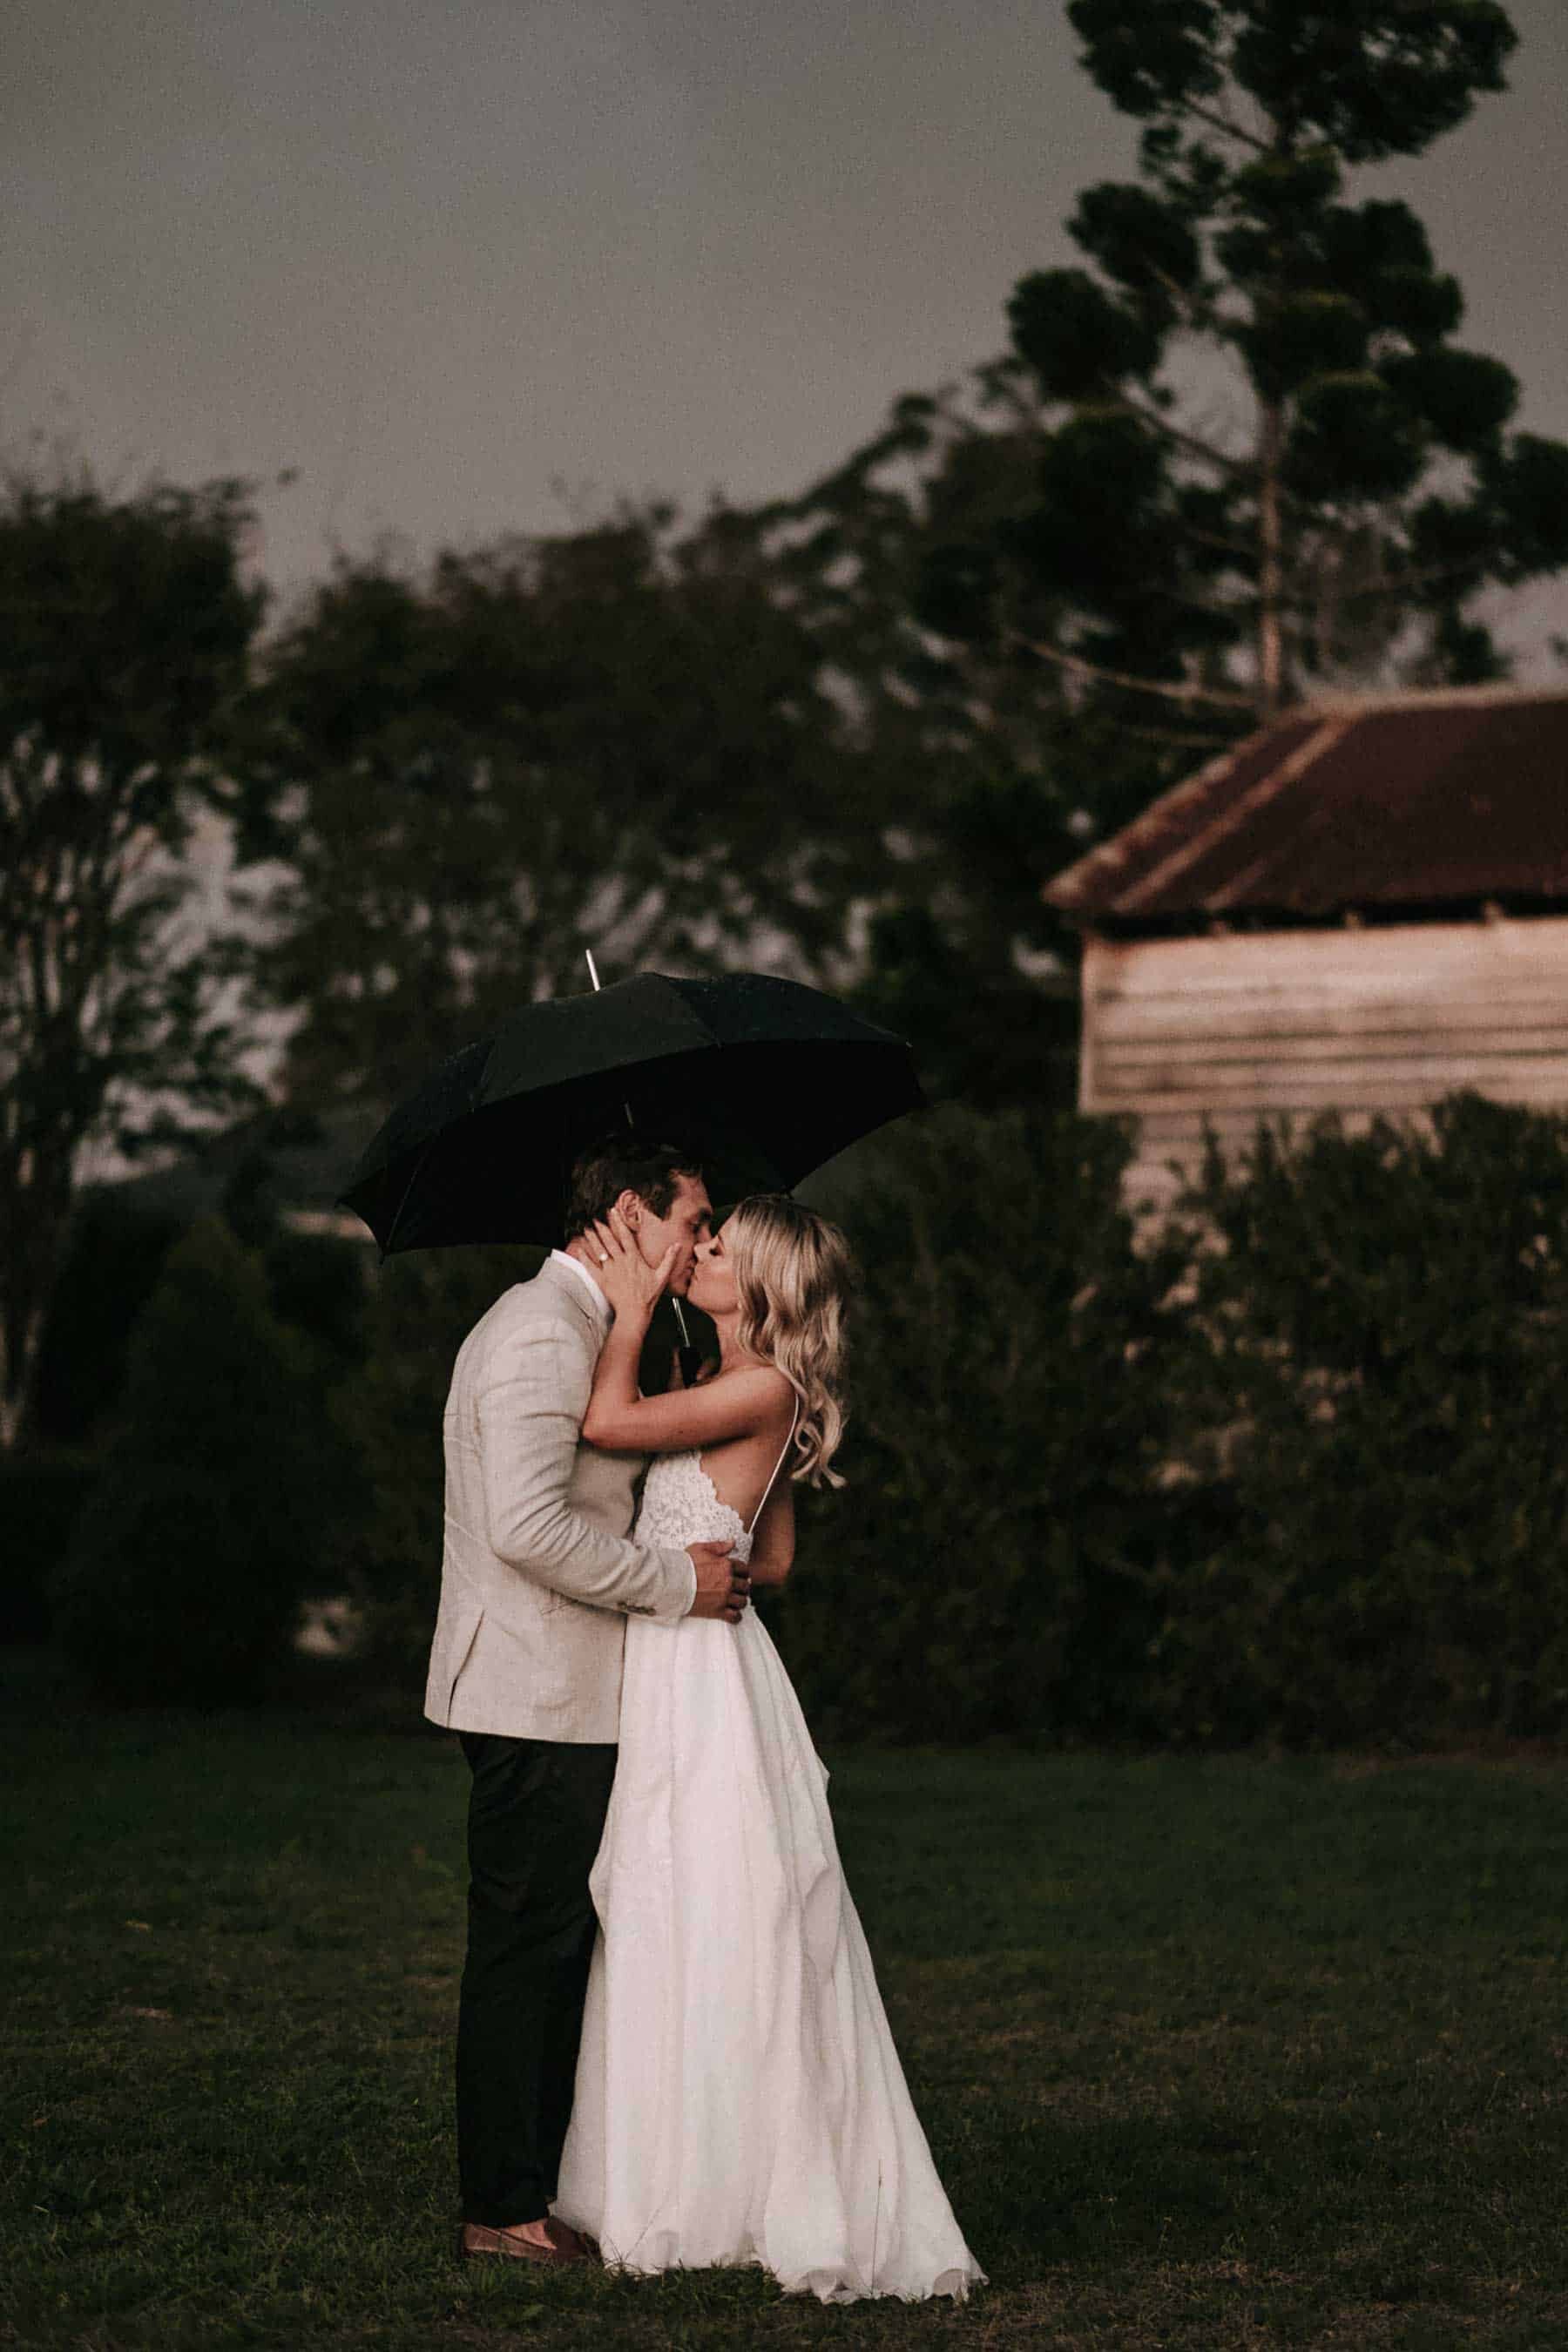 Toowoomba wedding photographed by Lucas & Co.